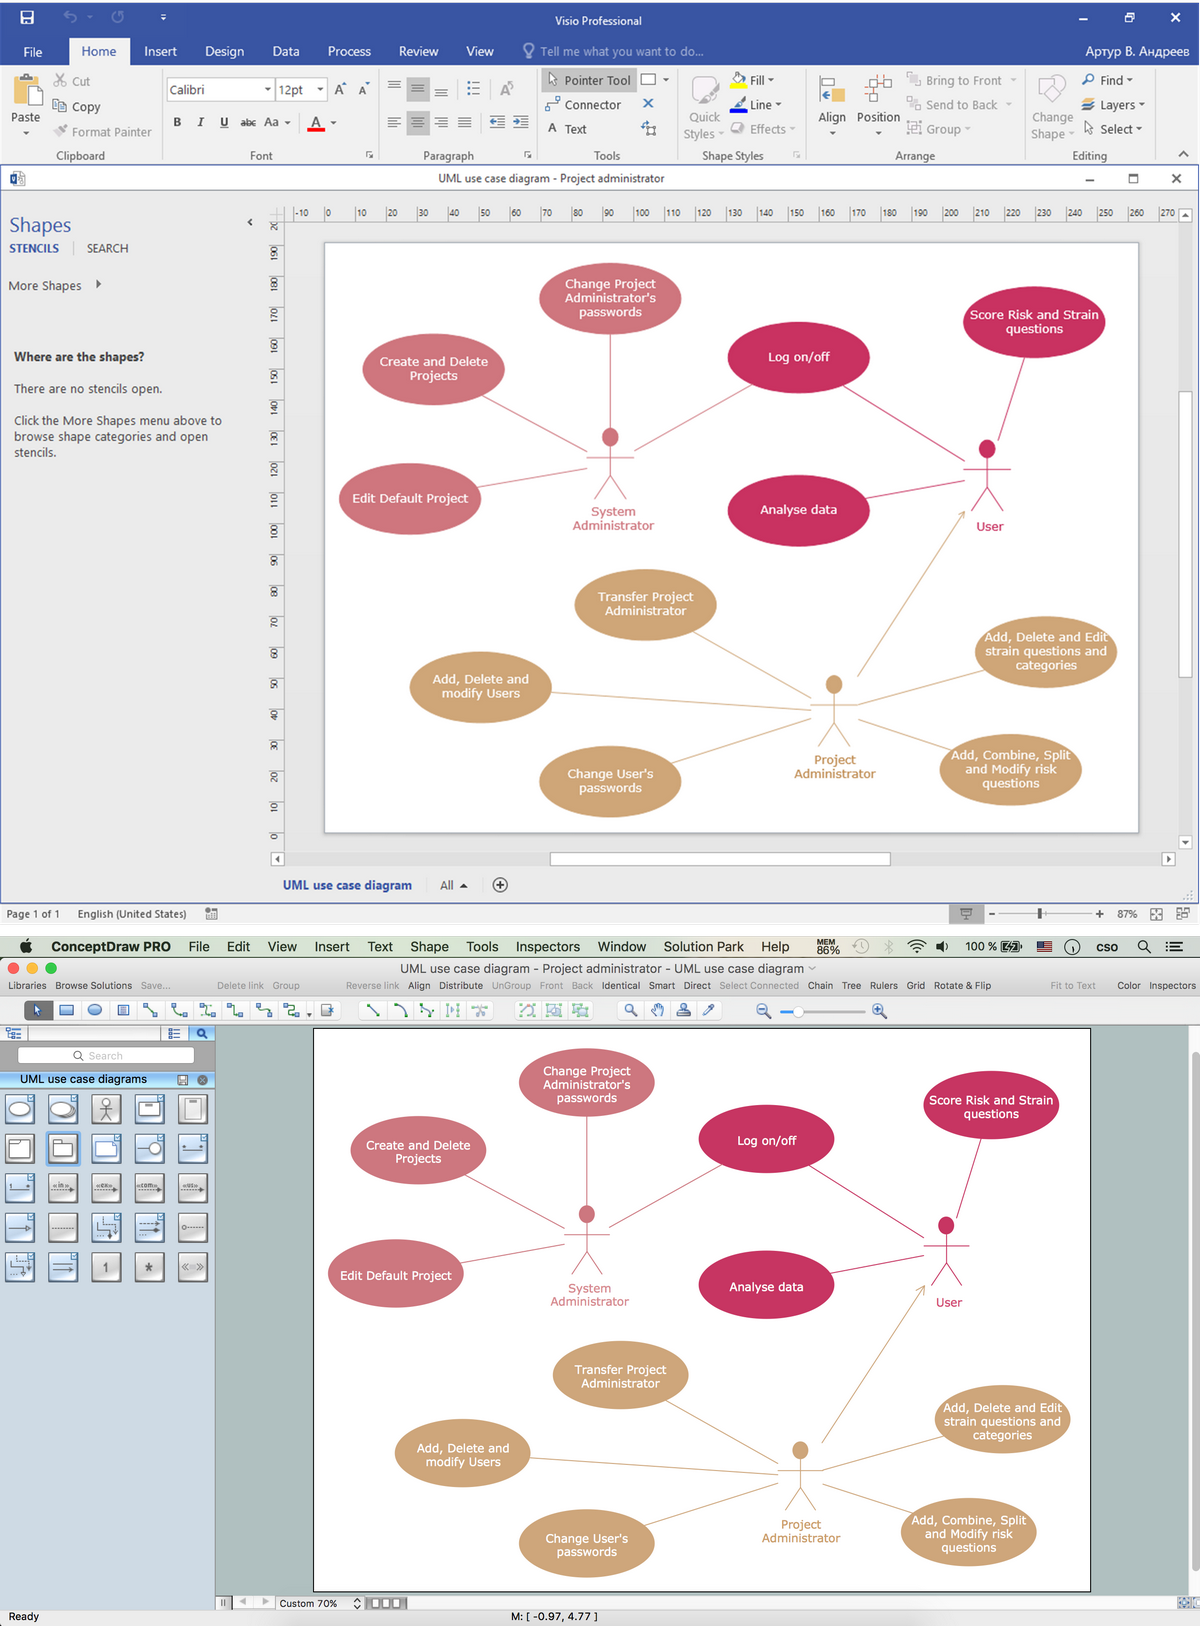 Example of document conversion from Visio to ConceptDraw